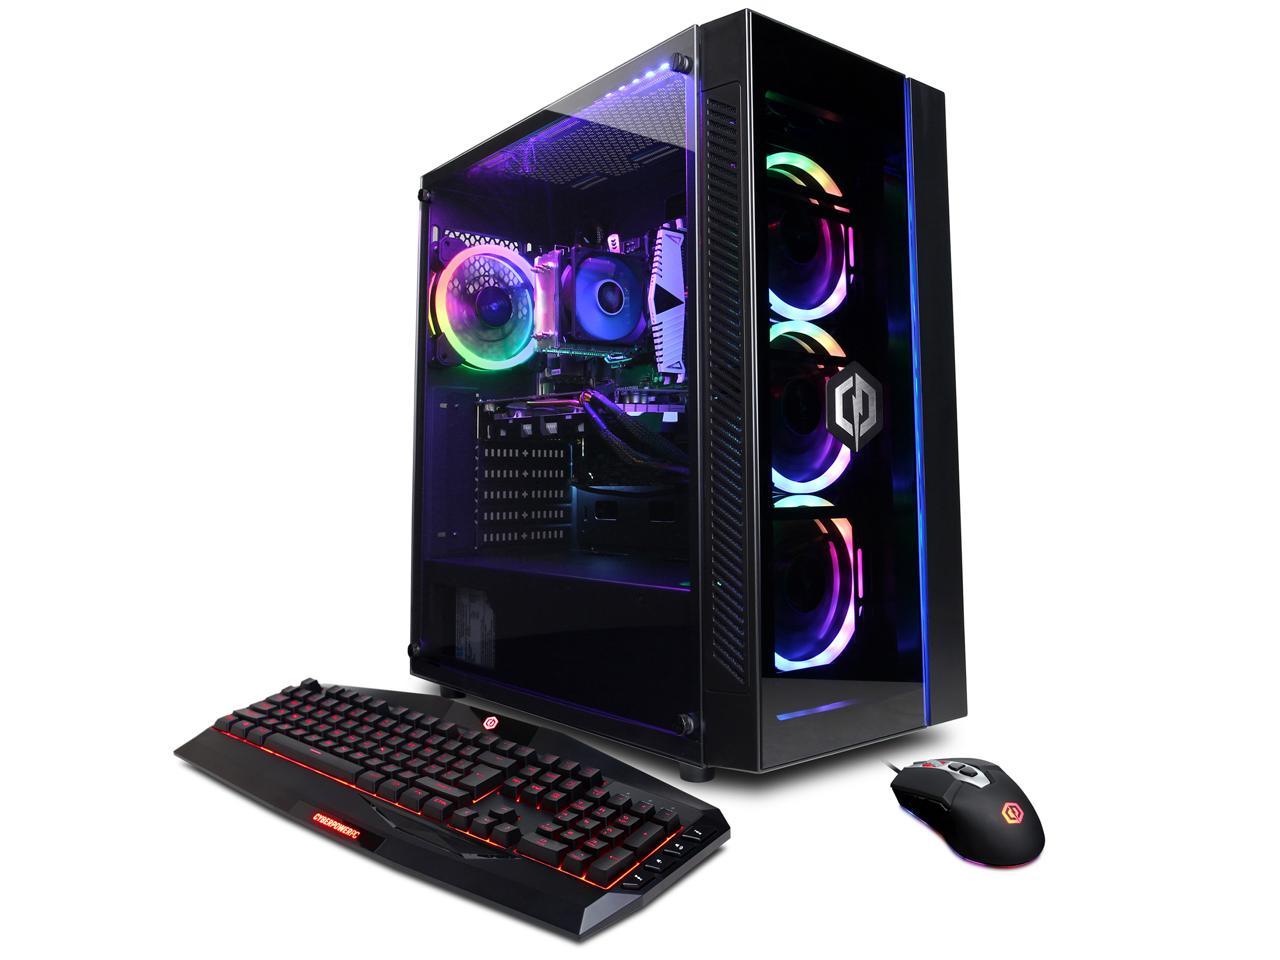 This 1080p capable gaming PC is yours for only $700, thanks to Black Friday | Windows Central